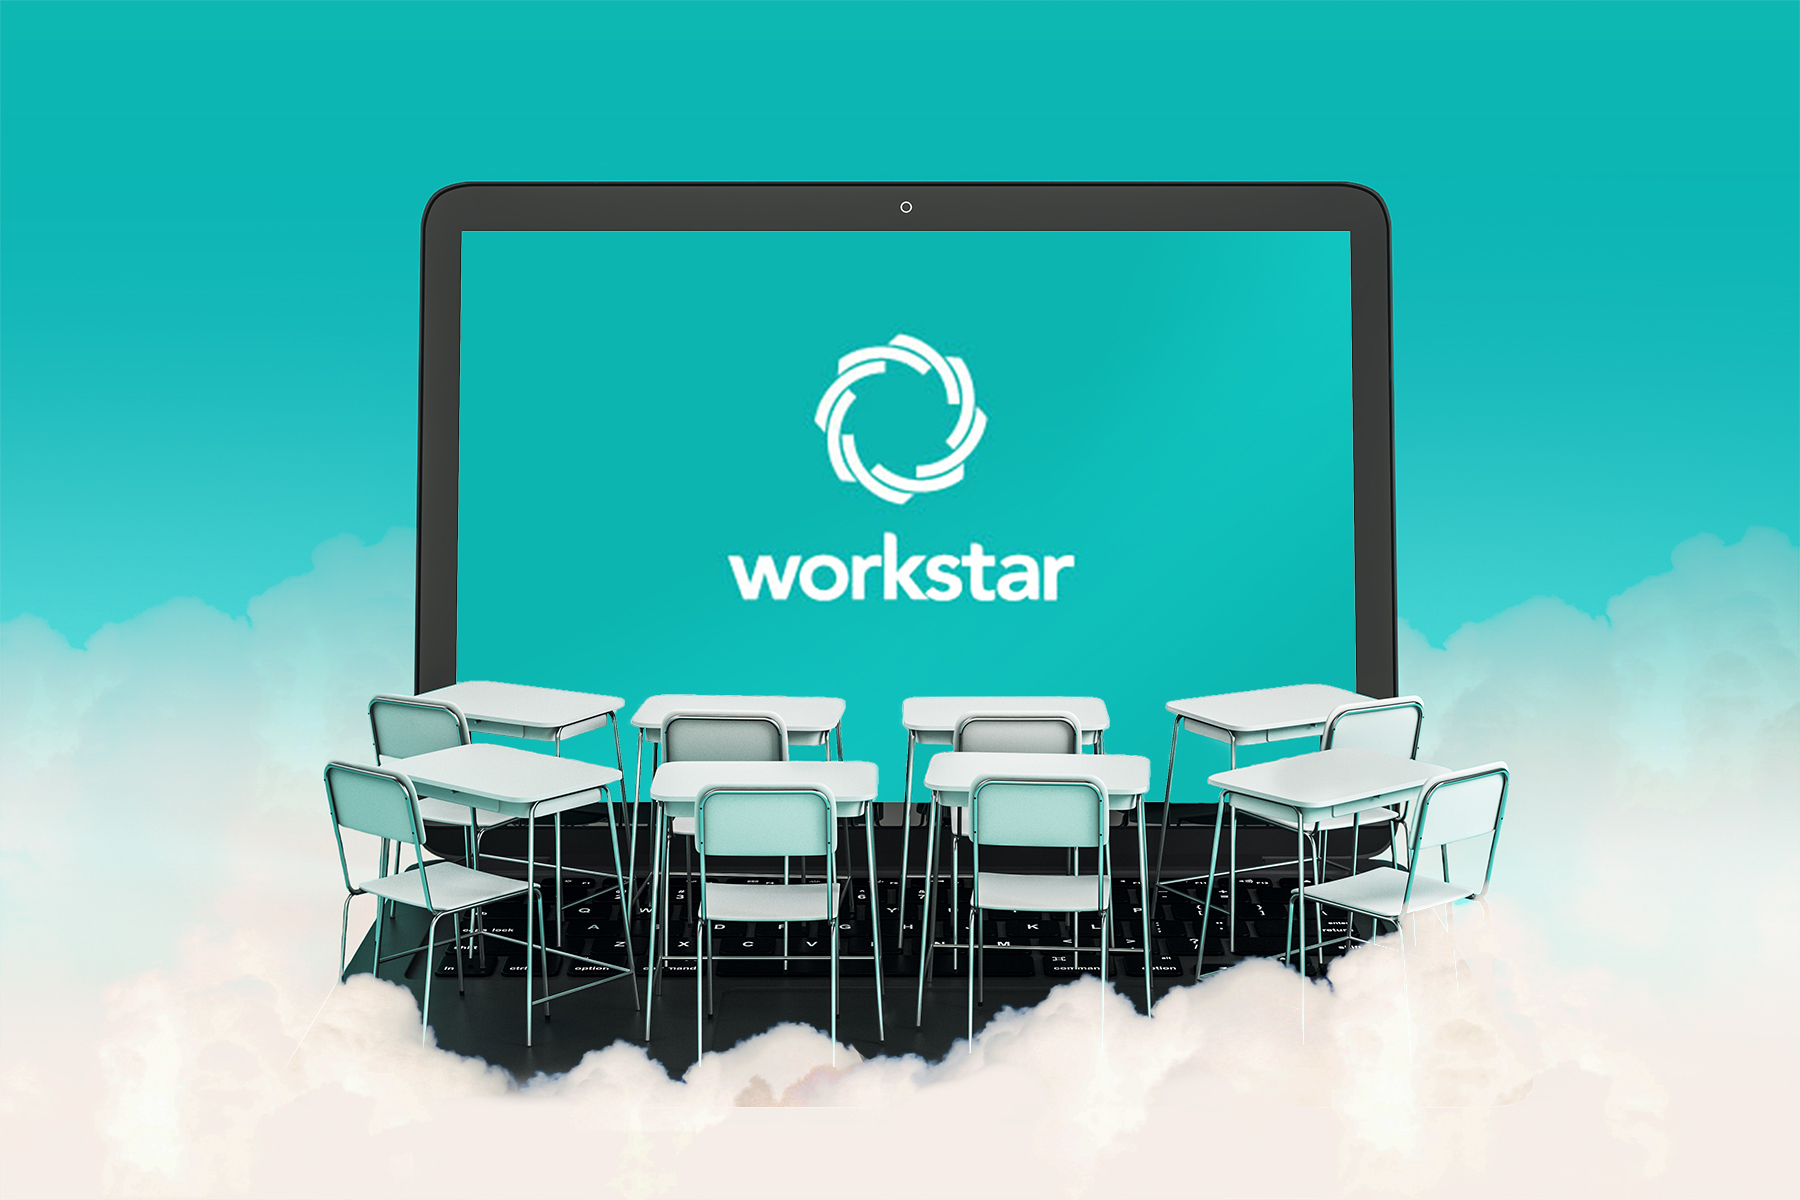 Workstar logo on a large laptop screen with teal background with eight desks and chairs on clouds